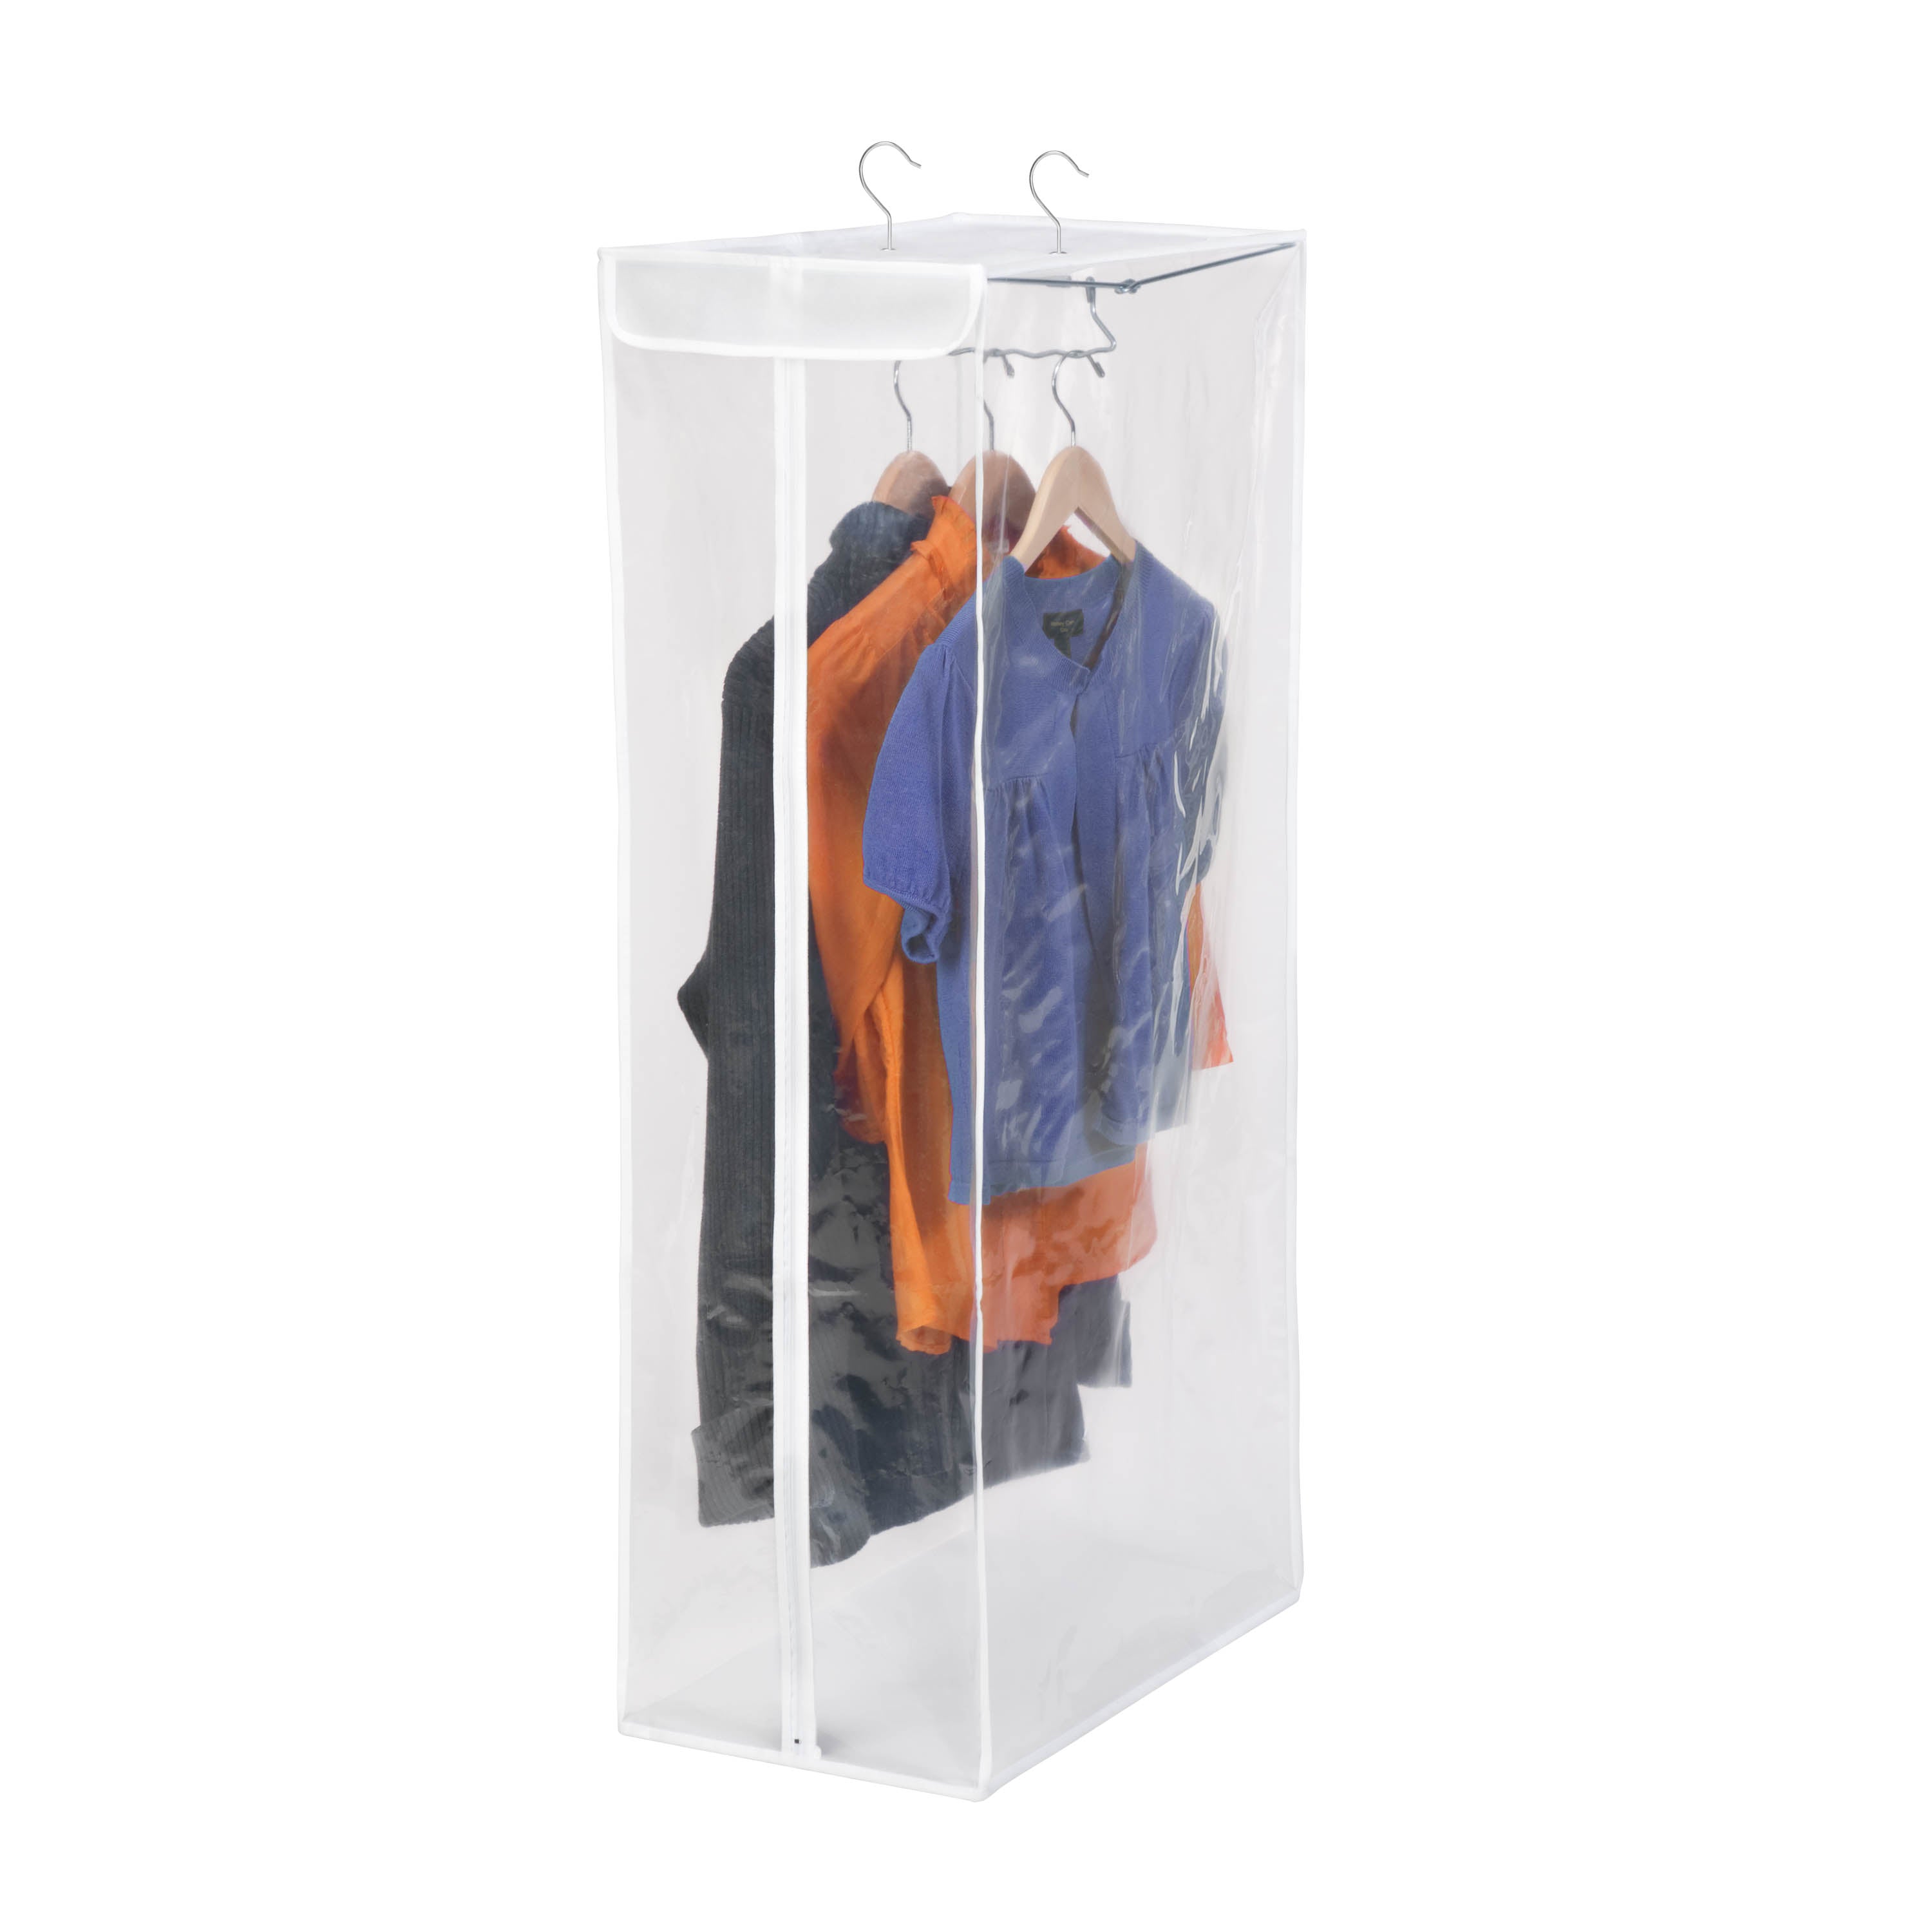 Store Hanging Clothes in Mini Storage